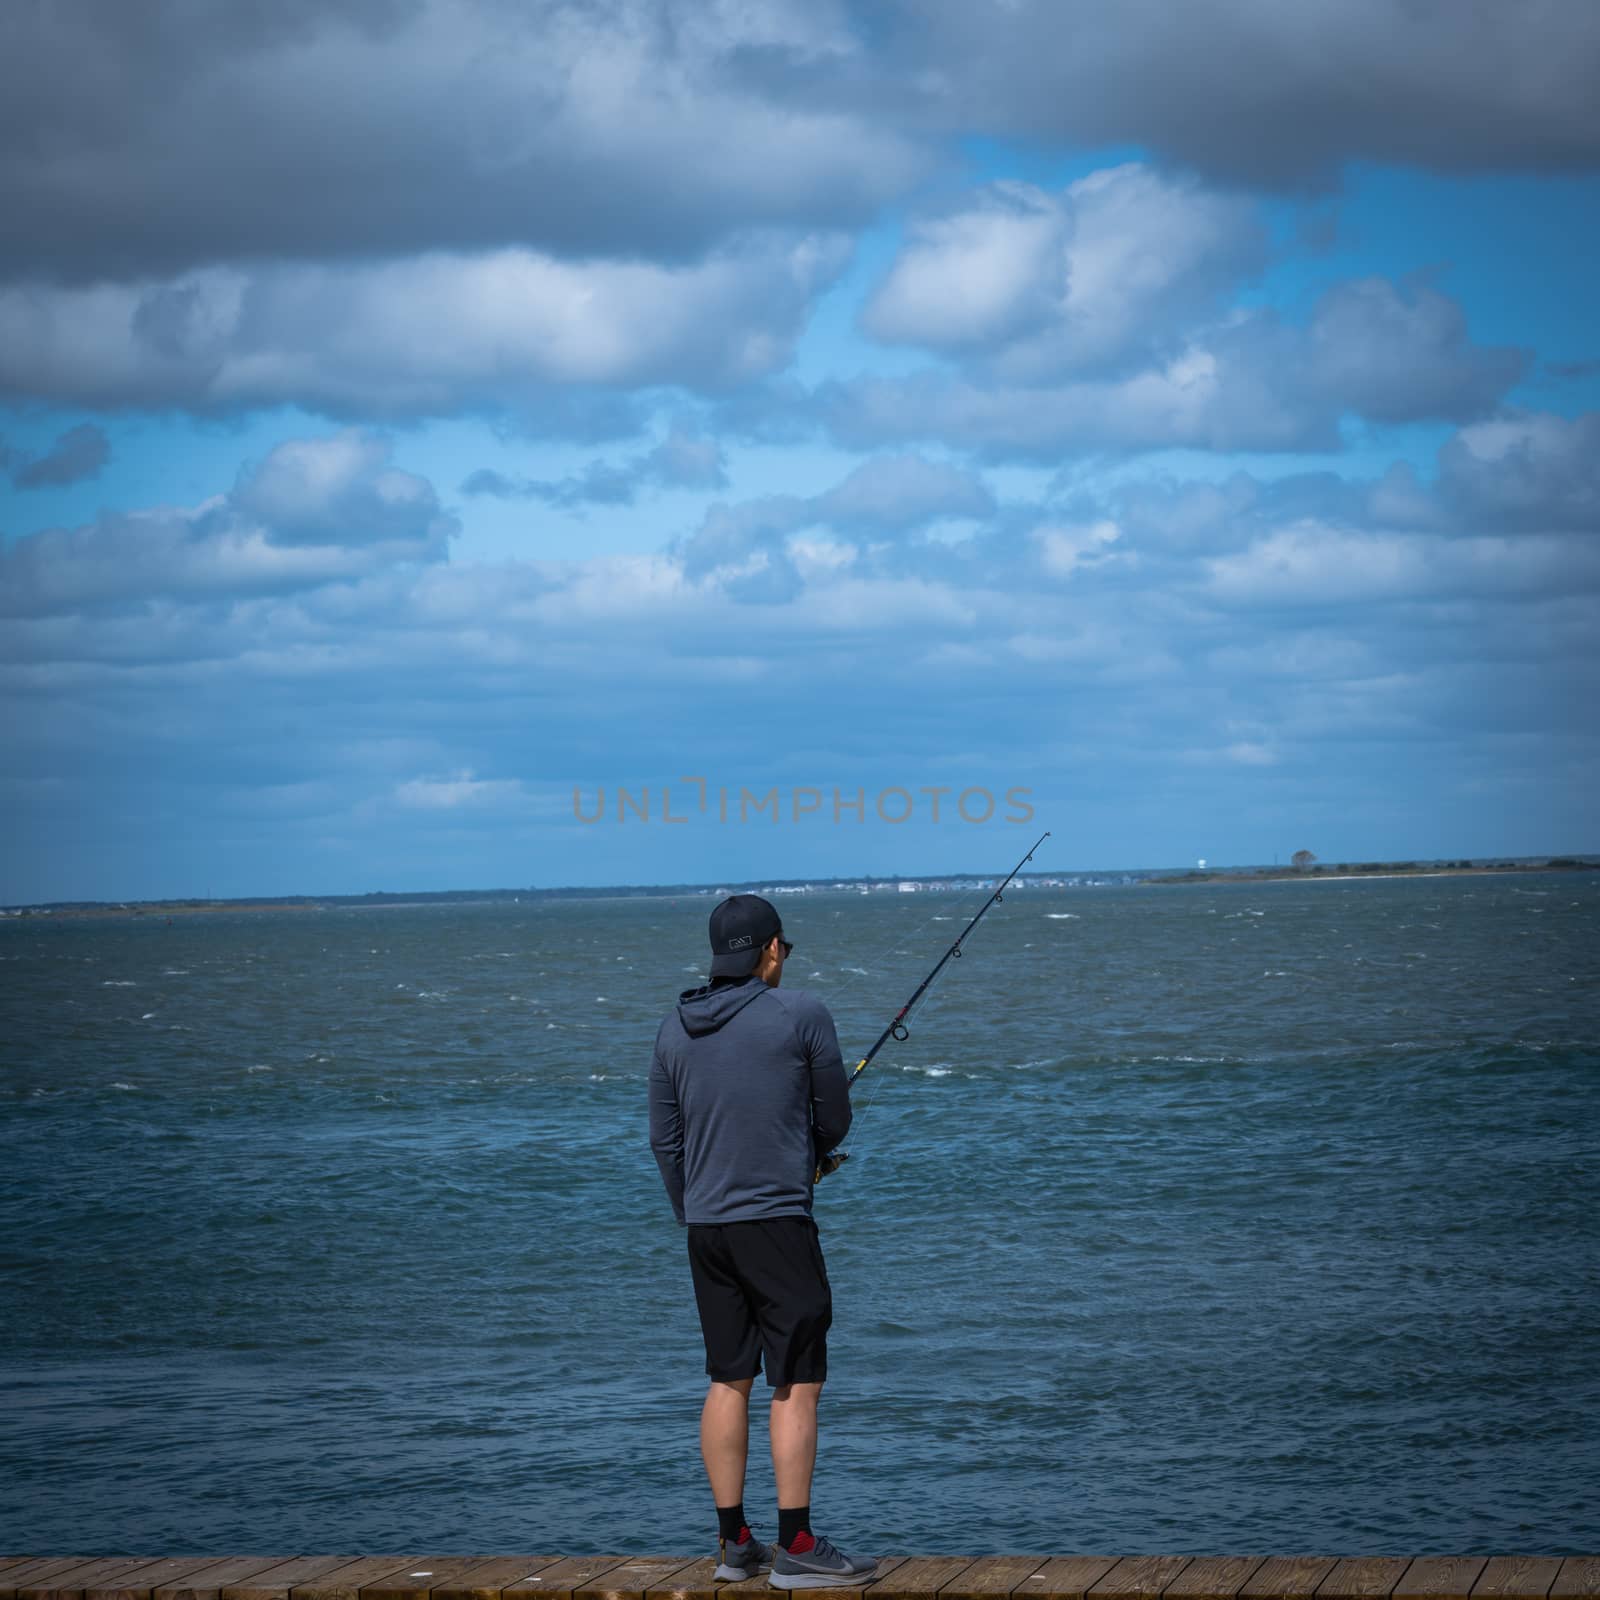 Young Man Goes Fishing by jfbenning